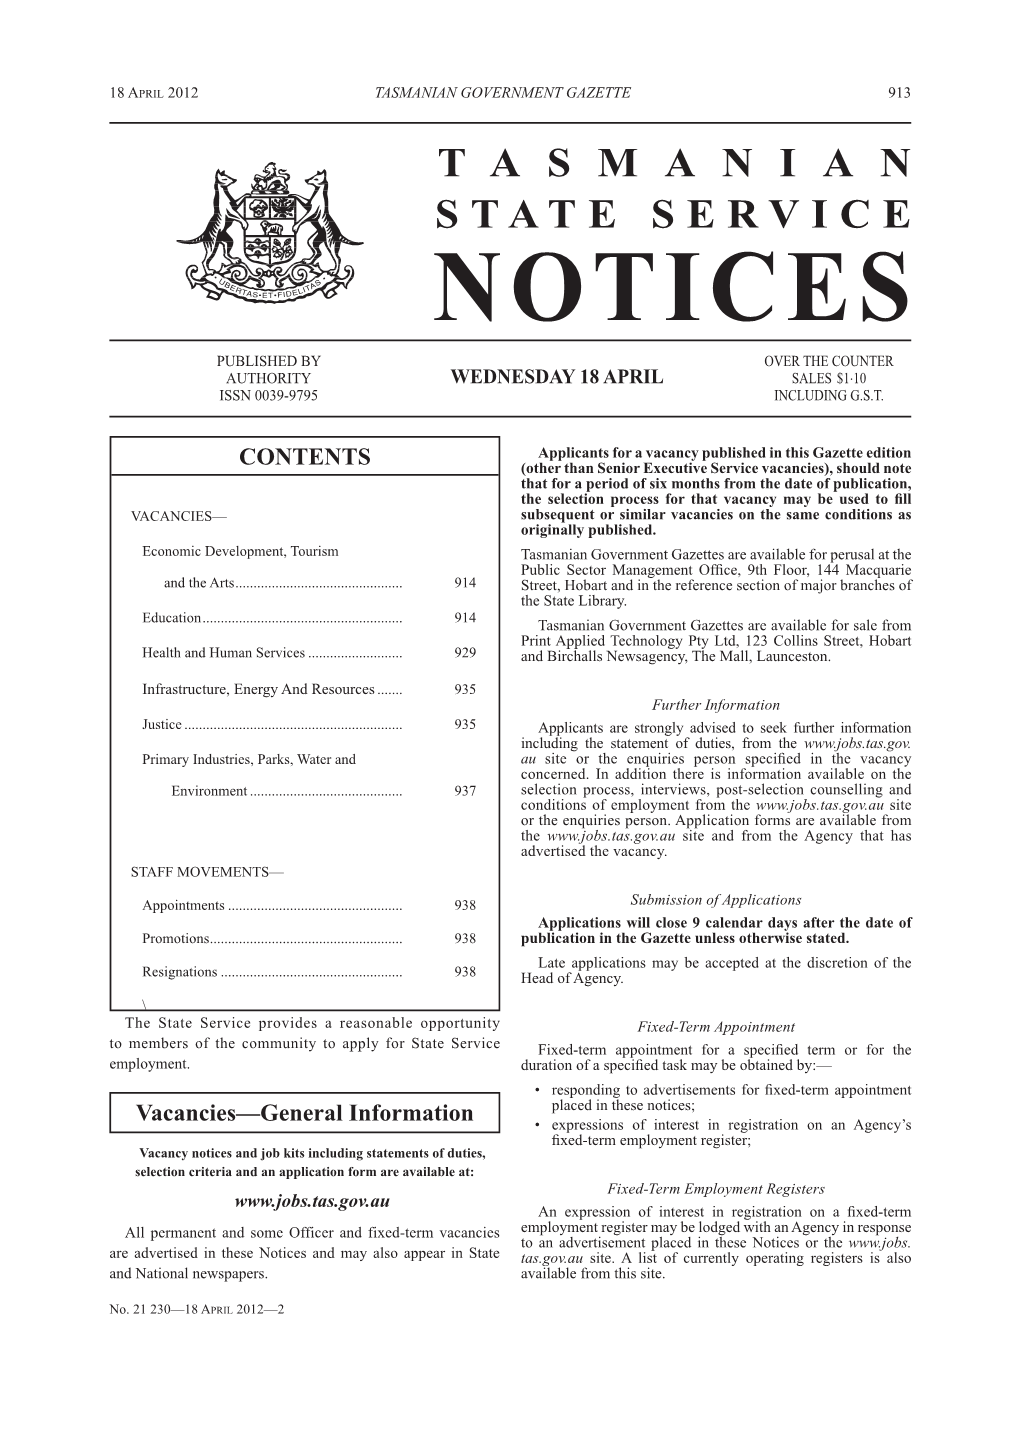 Notices Published by Over the Counter Authority Wednesday 18 April Sales $1.10 Issn 0039-9795 Including G.S.T